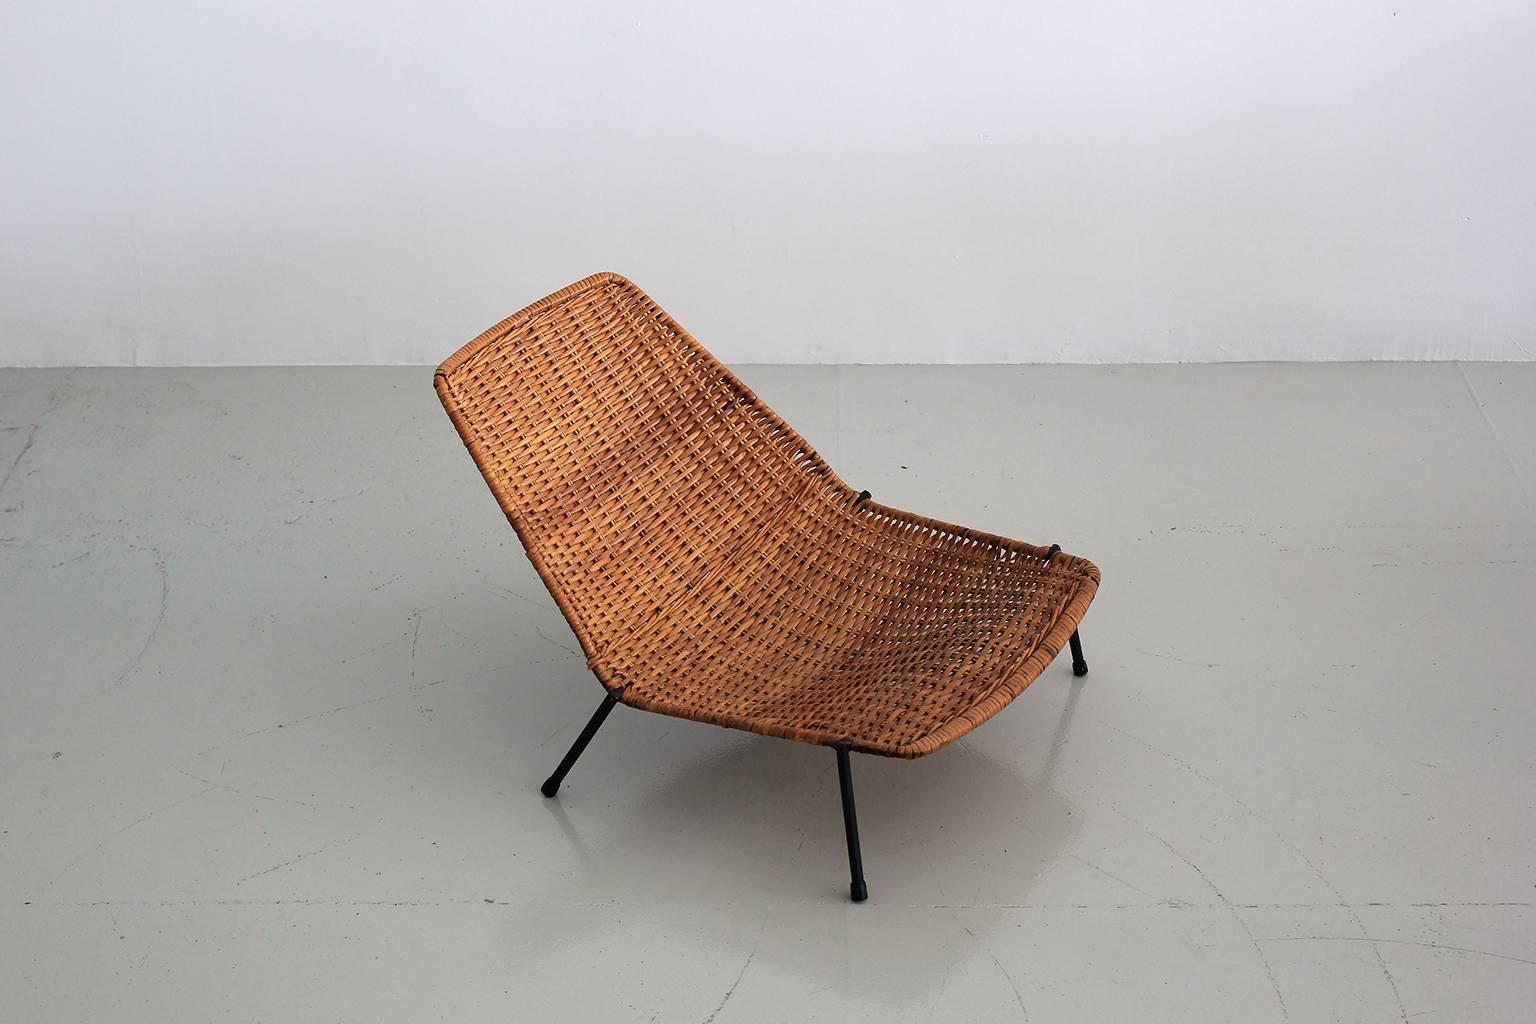 Iron Woven Wicker Pool Chairs 